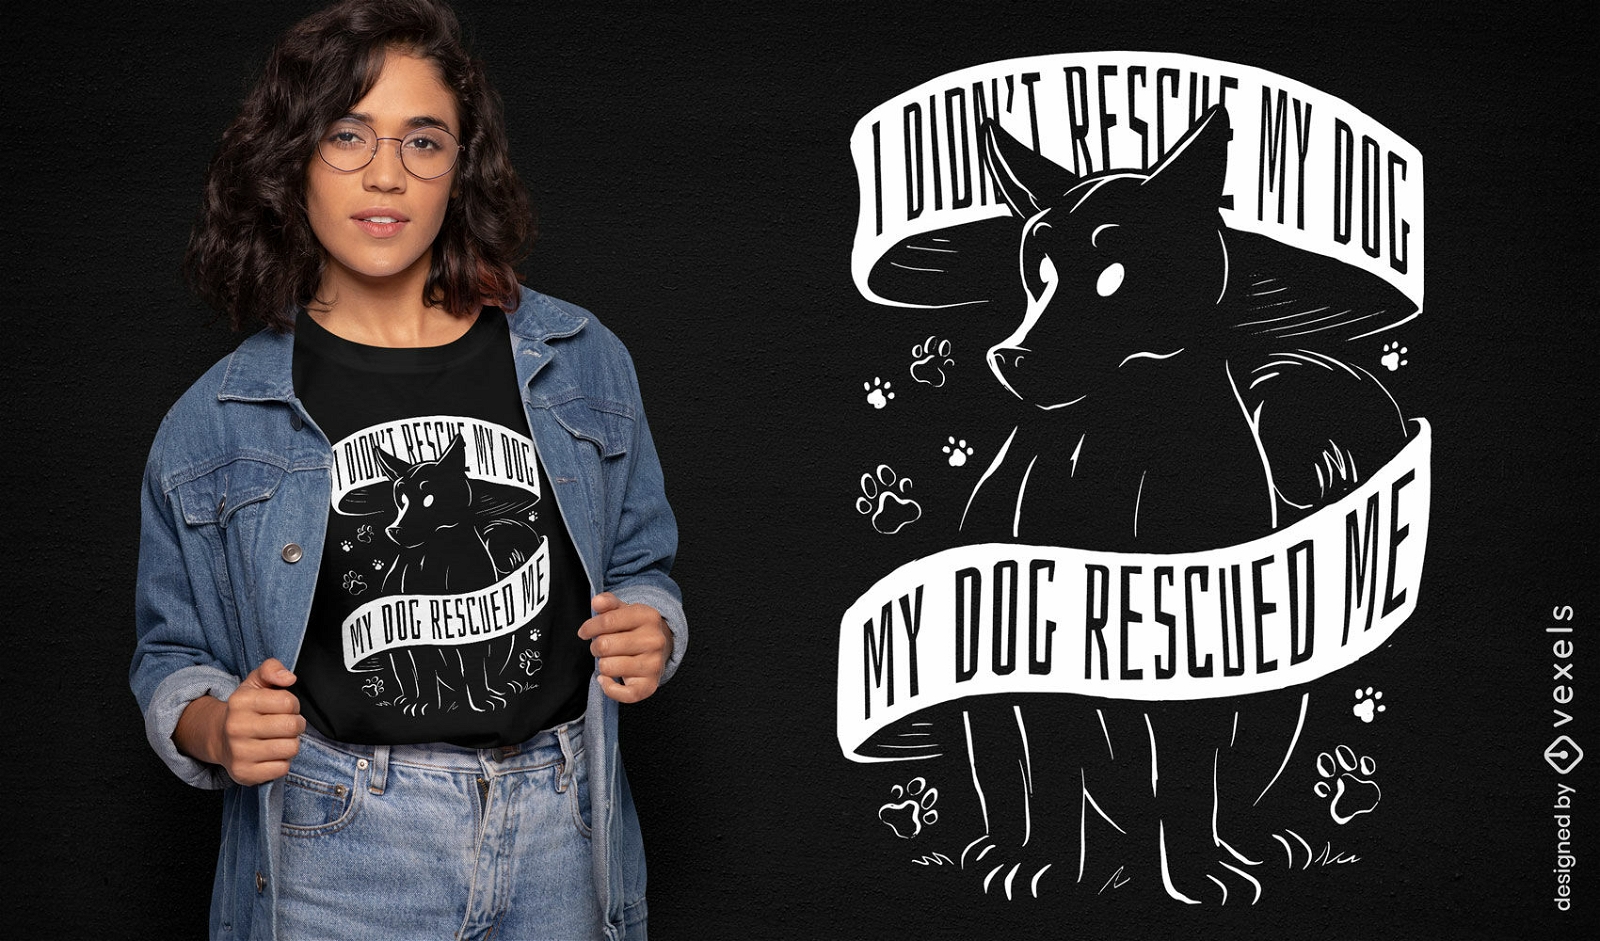 My dog rescued me t-shirt design